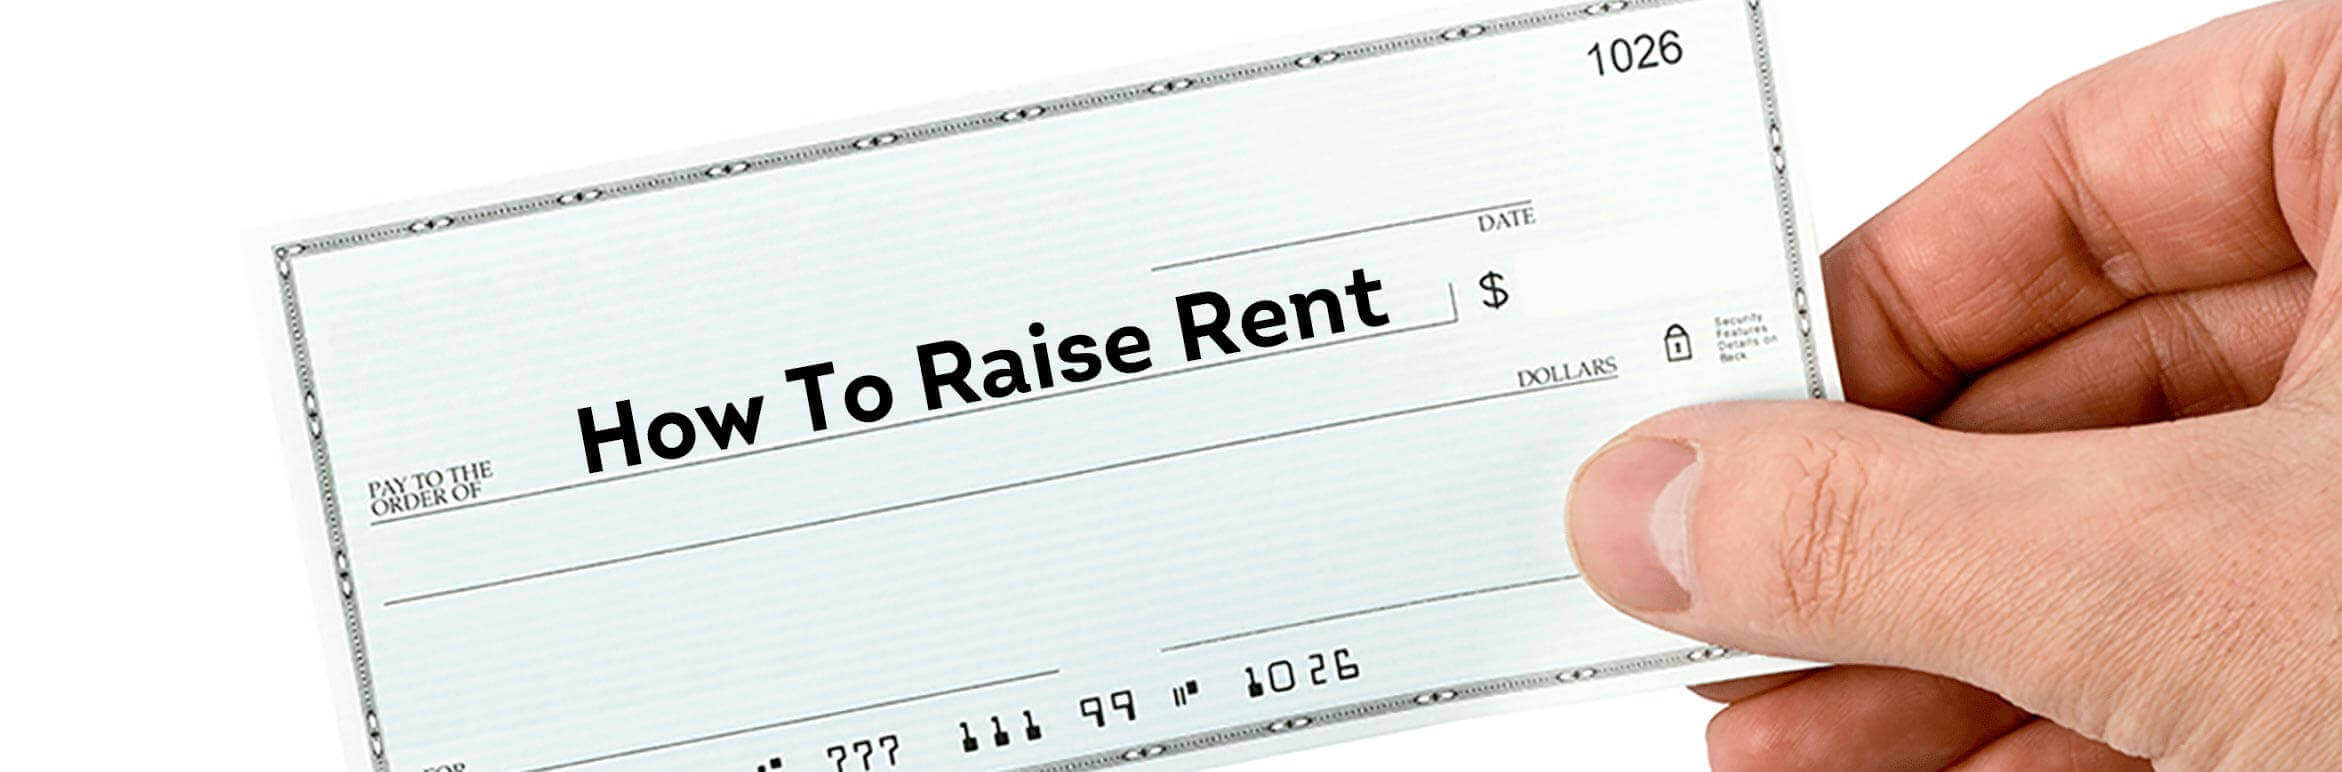 how to raise the rent in 4 easy steps